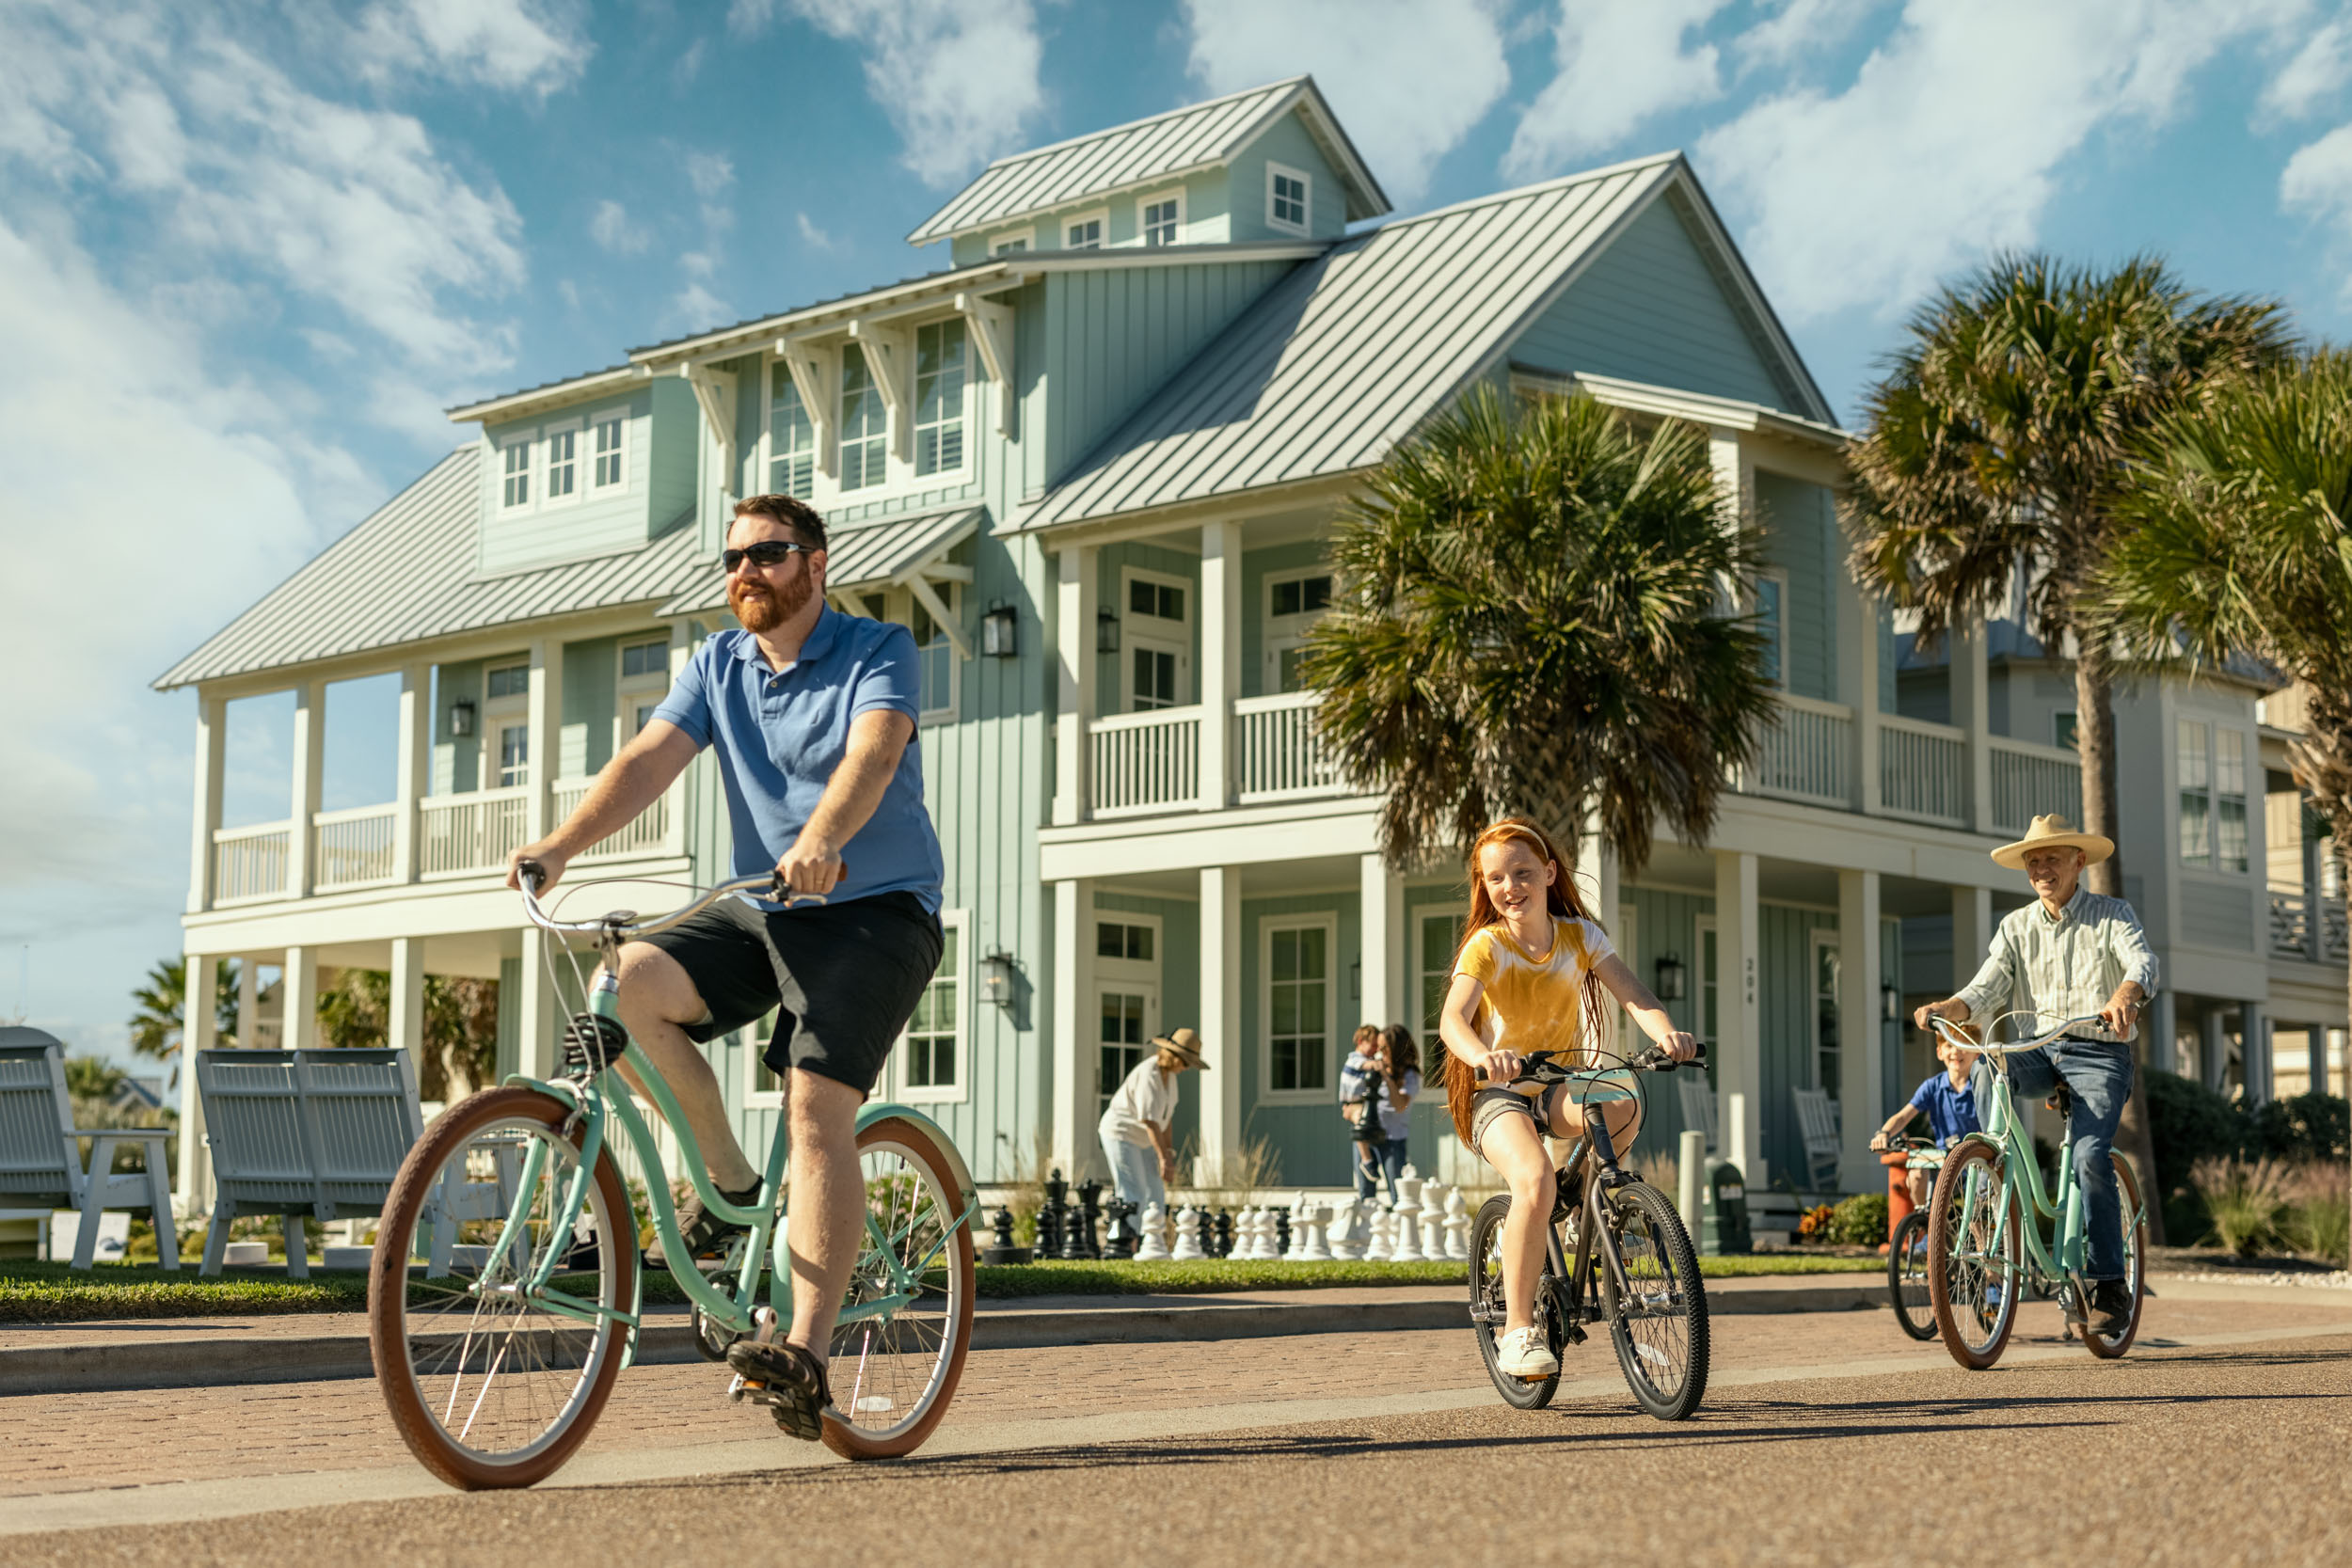 family riding bicycles in beach community with house in background